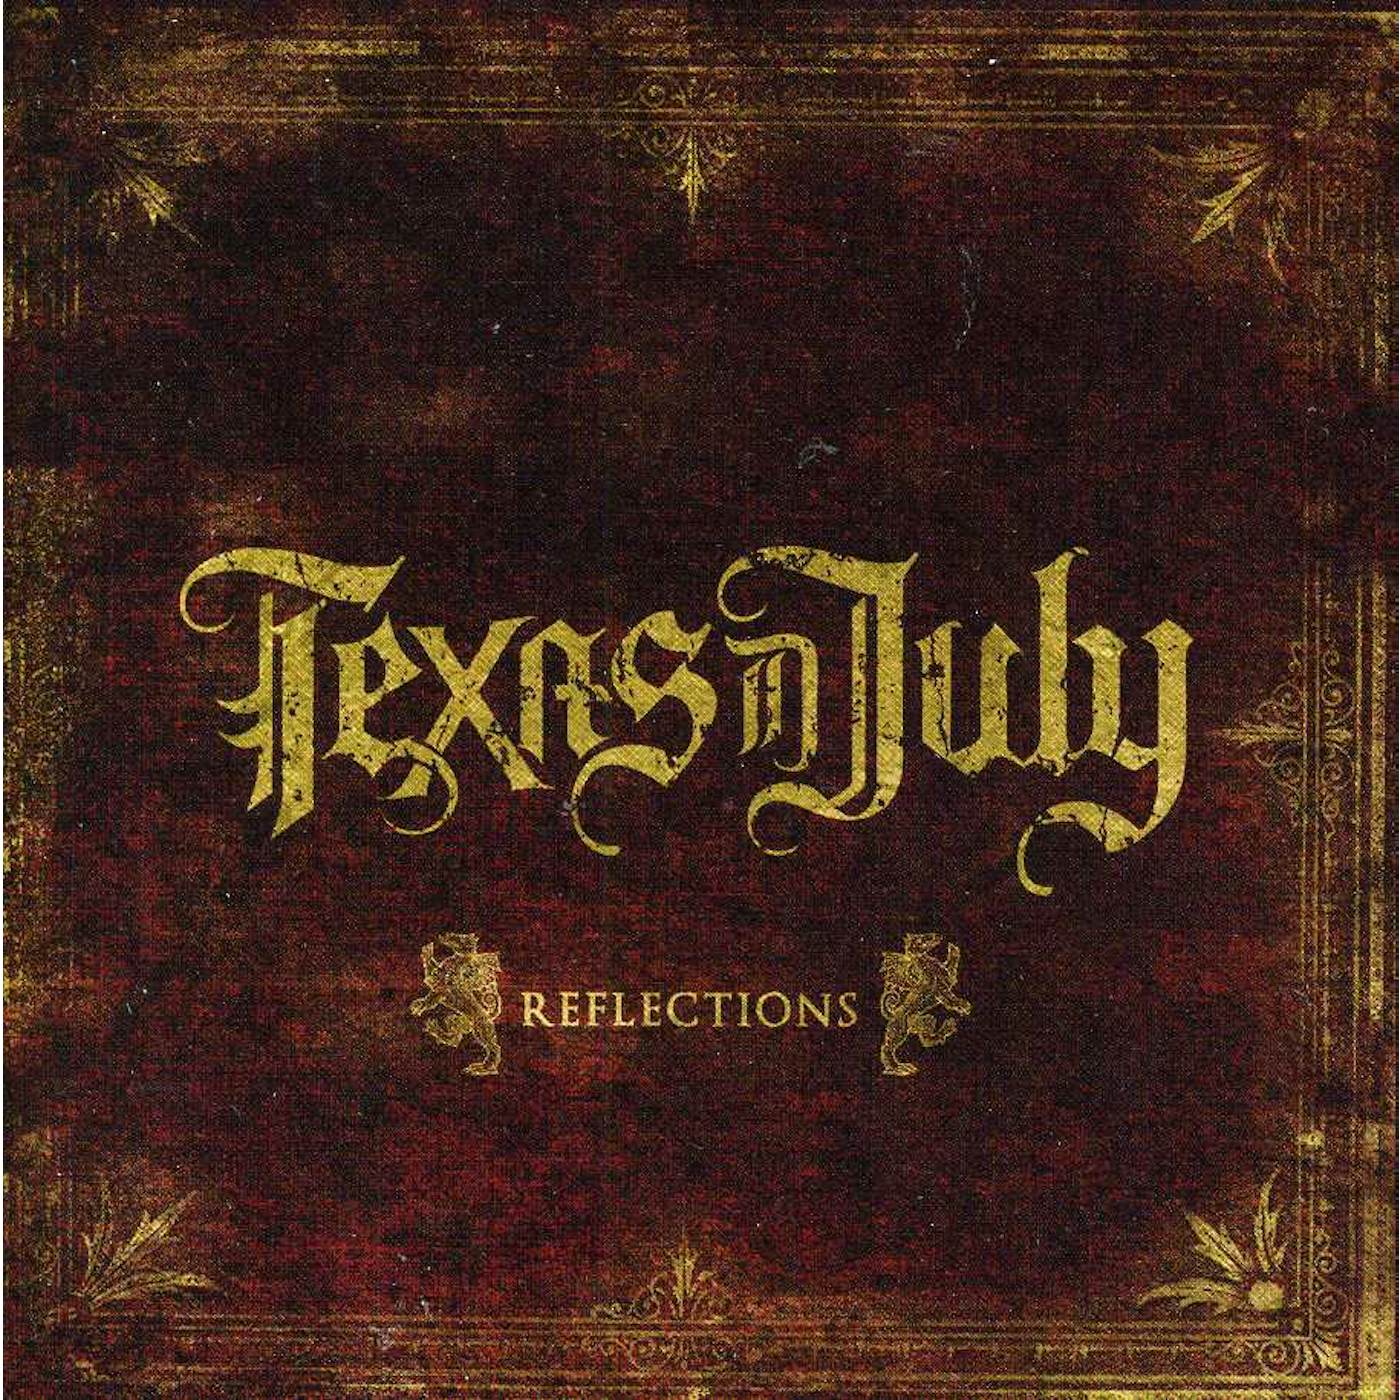 Texas In July Reflections Vinyl Record